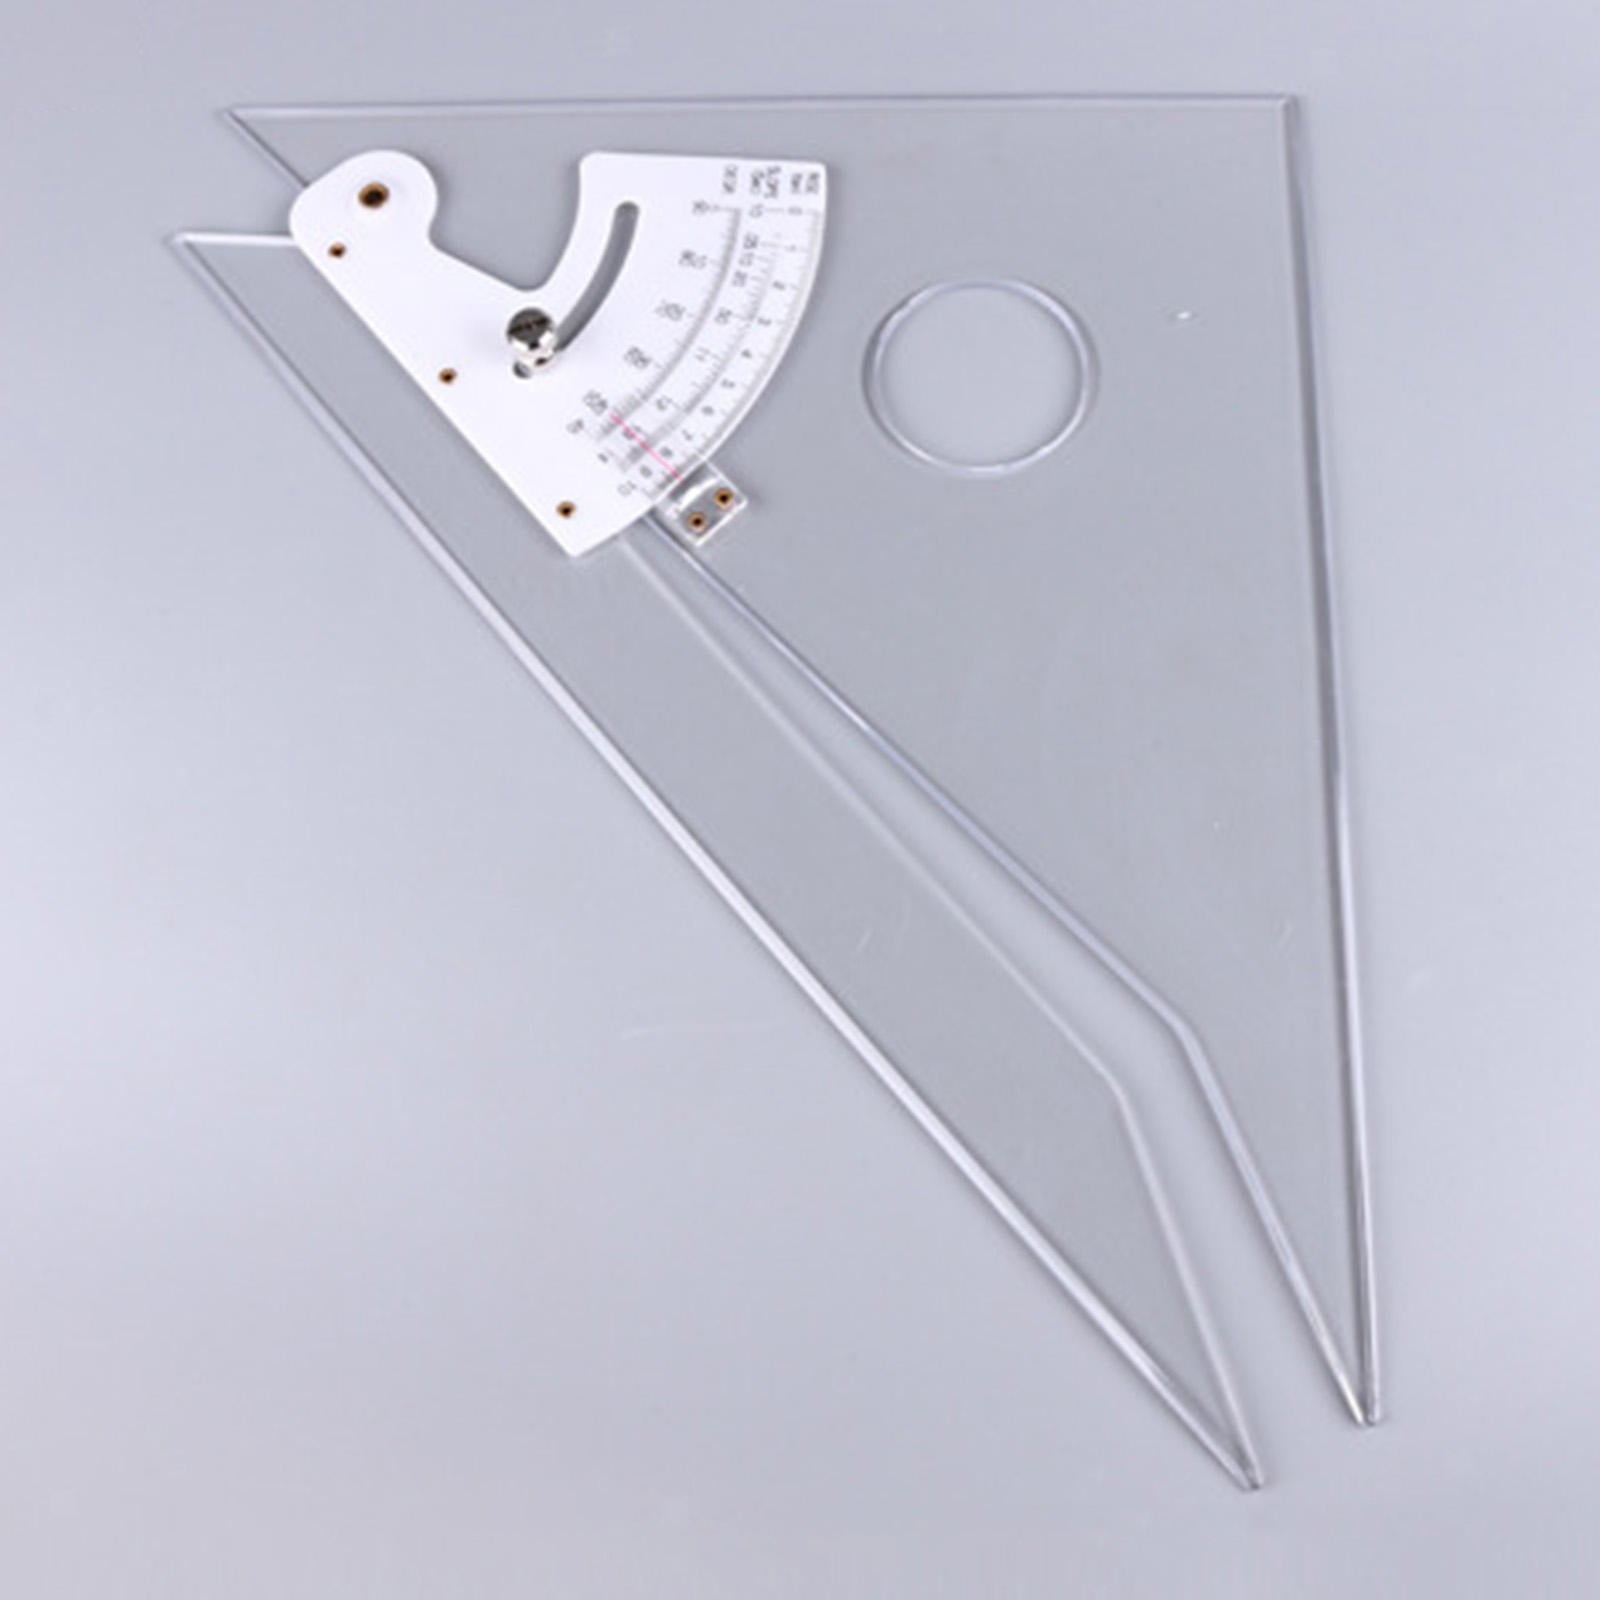 Acrylic Drafting Triangle Ruler Clear Metric Adjustable Precision 30cm Scale